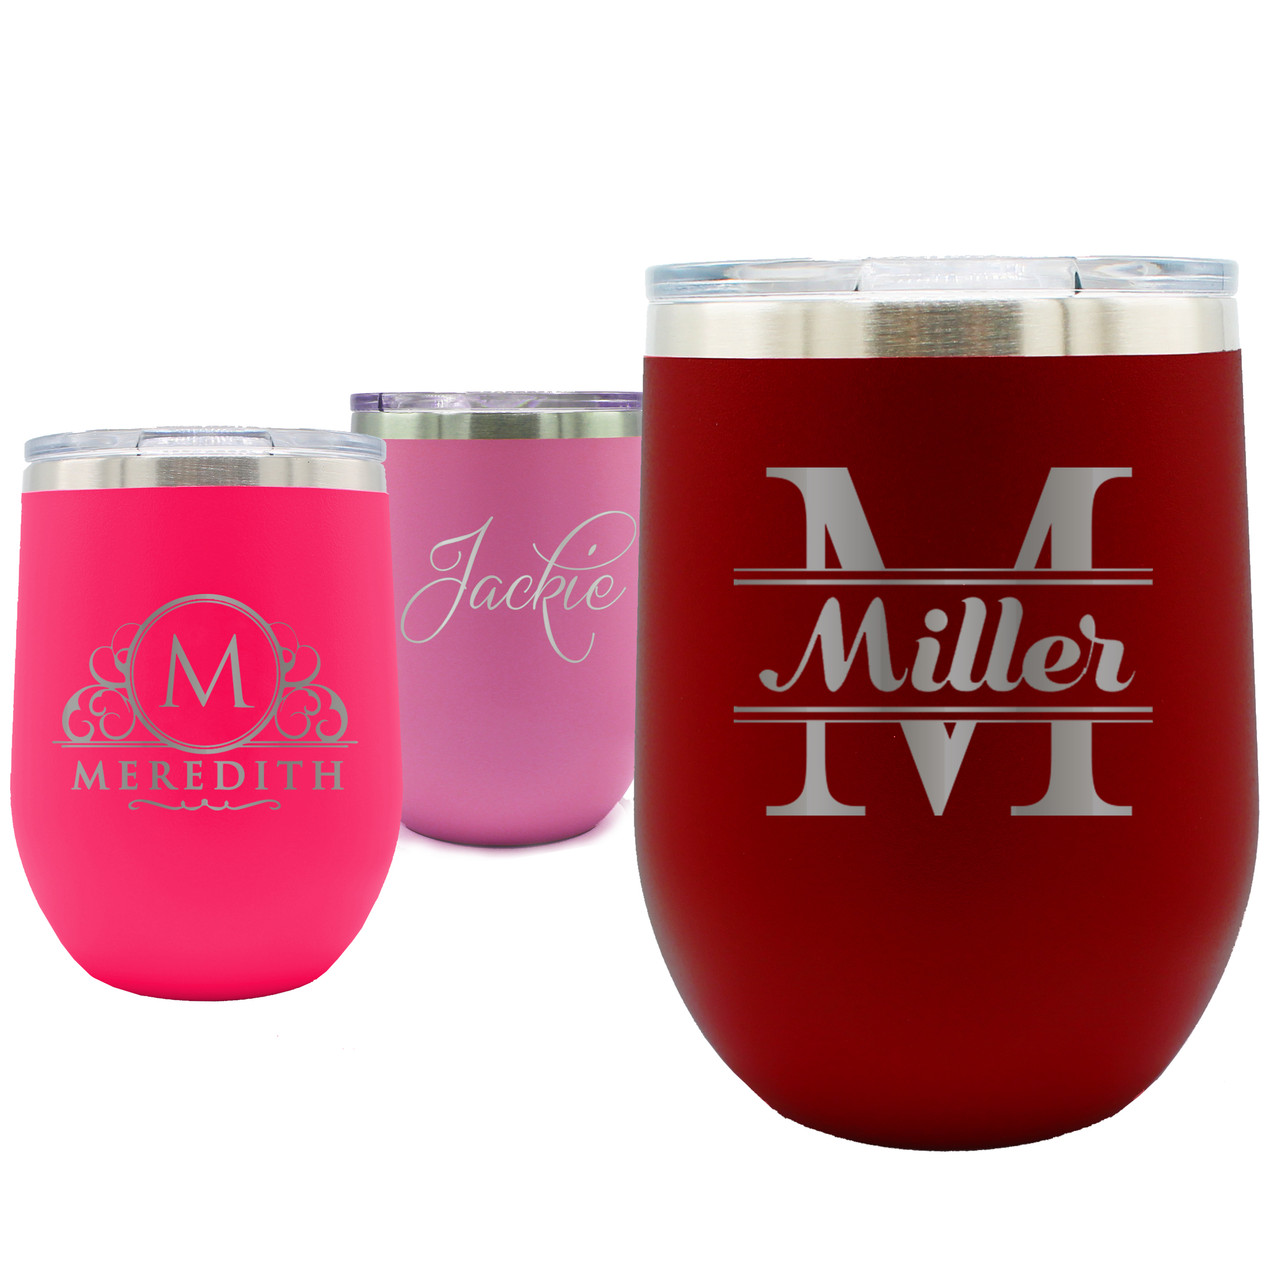 https://cdn10.bigcommerce.com/s-x4jj0pm/products/522/images/6962/Insulated_Stemless_Set_Of_3multi9_-_Copy__82785.1597963094.1280.1280.jpg?c=2